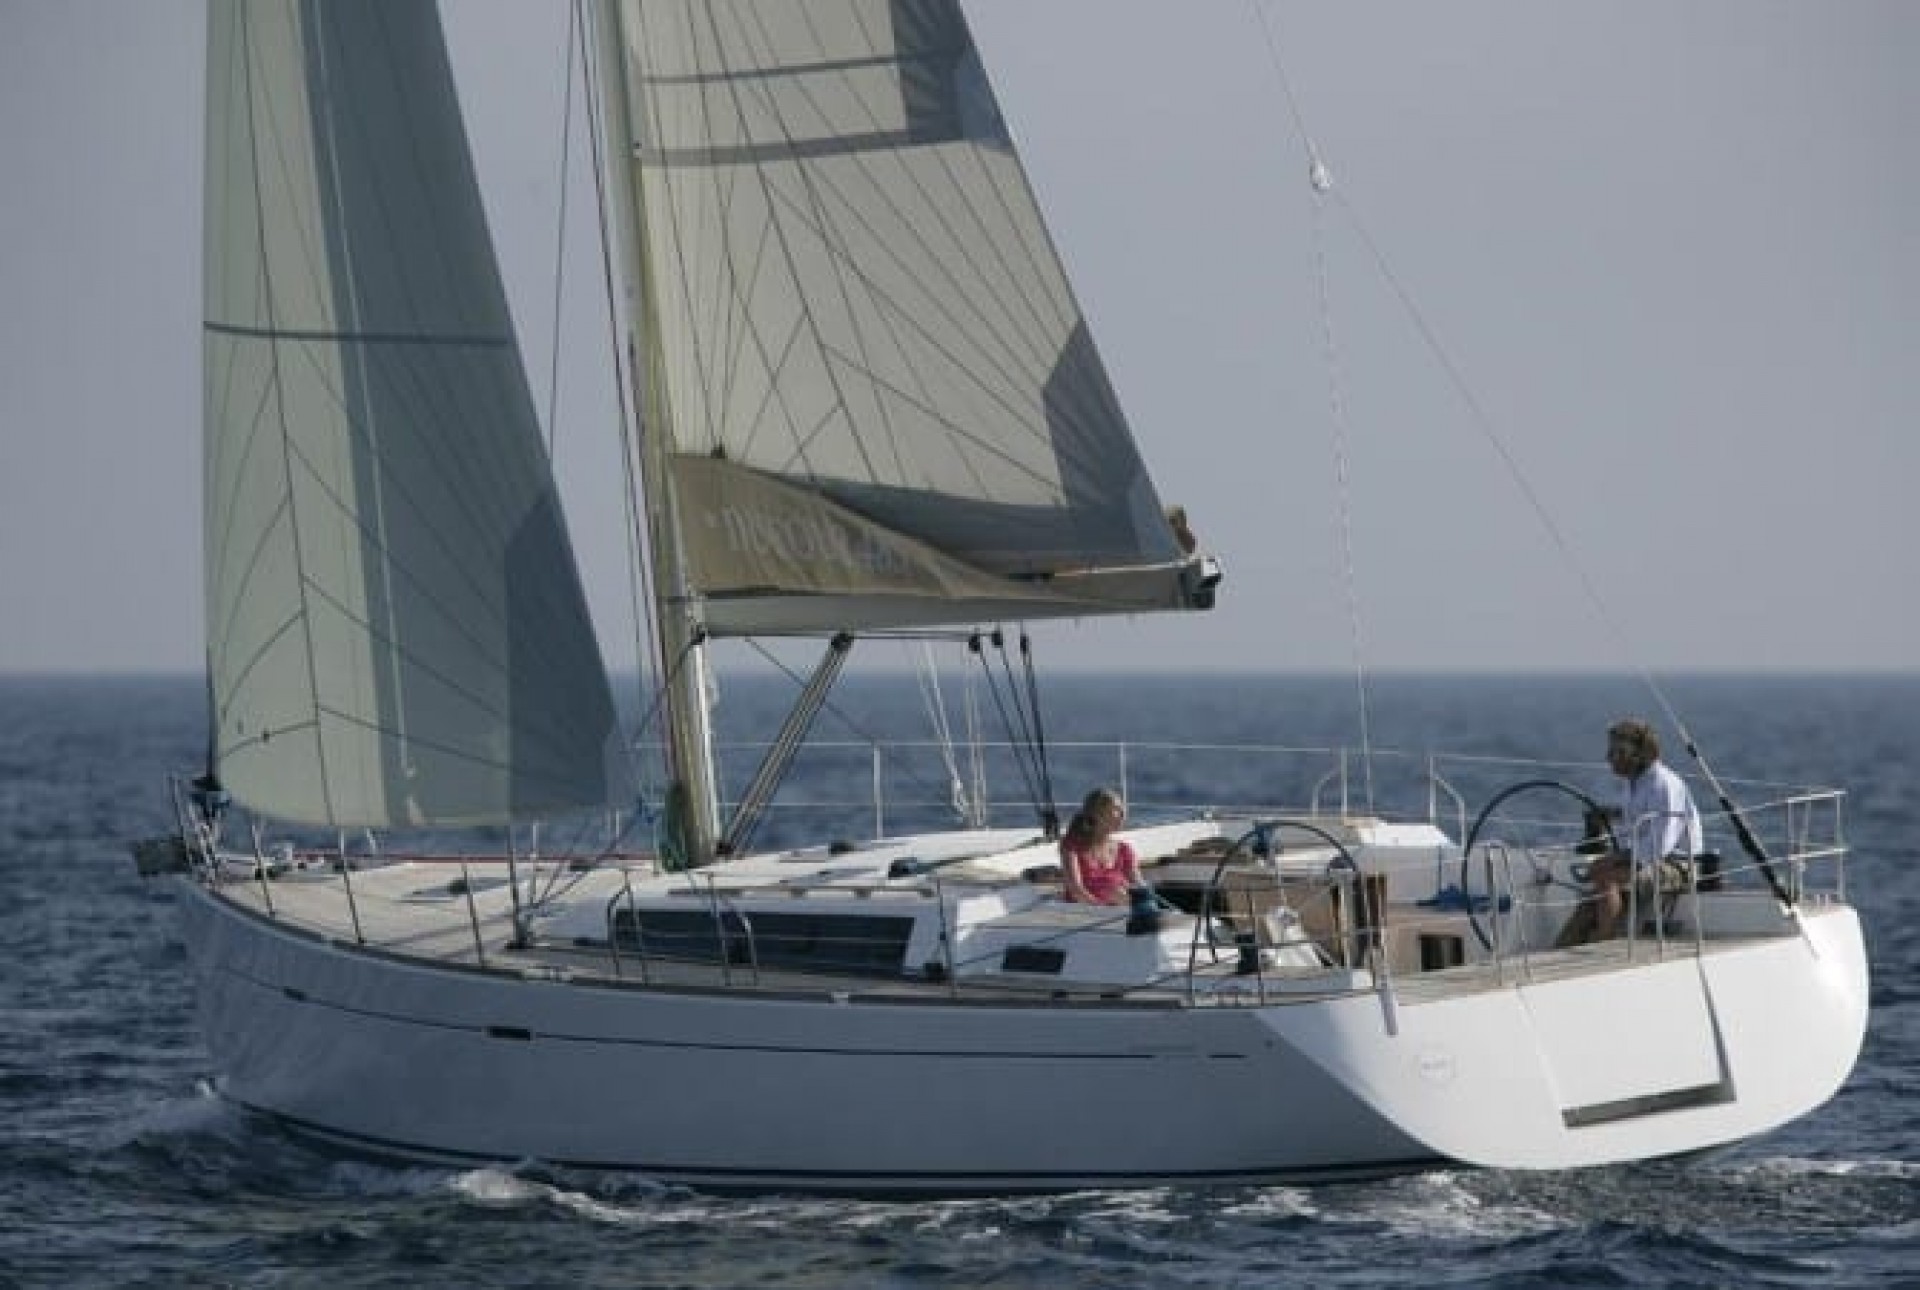 DUFOUR 460 GRAND`LARGE (4 CABINS, FROM 2016)